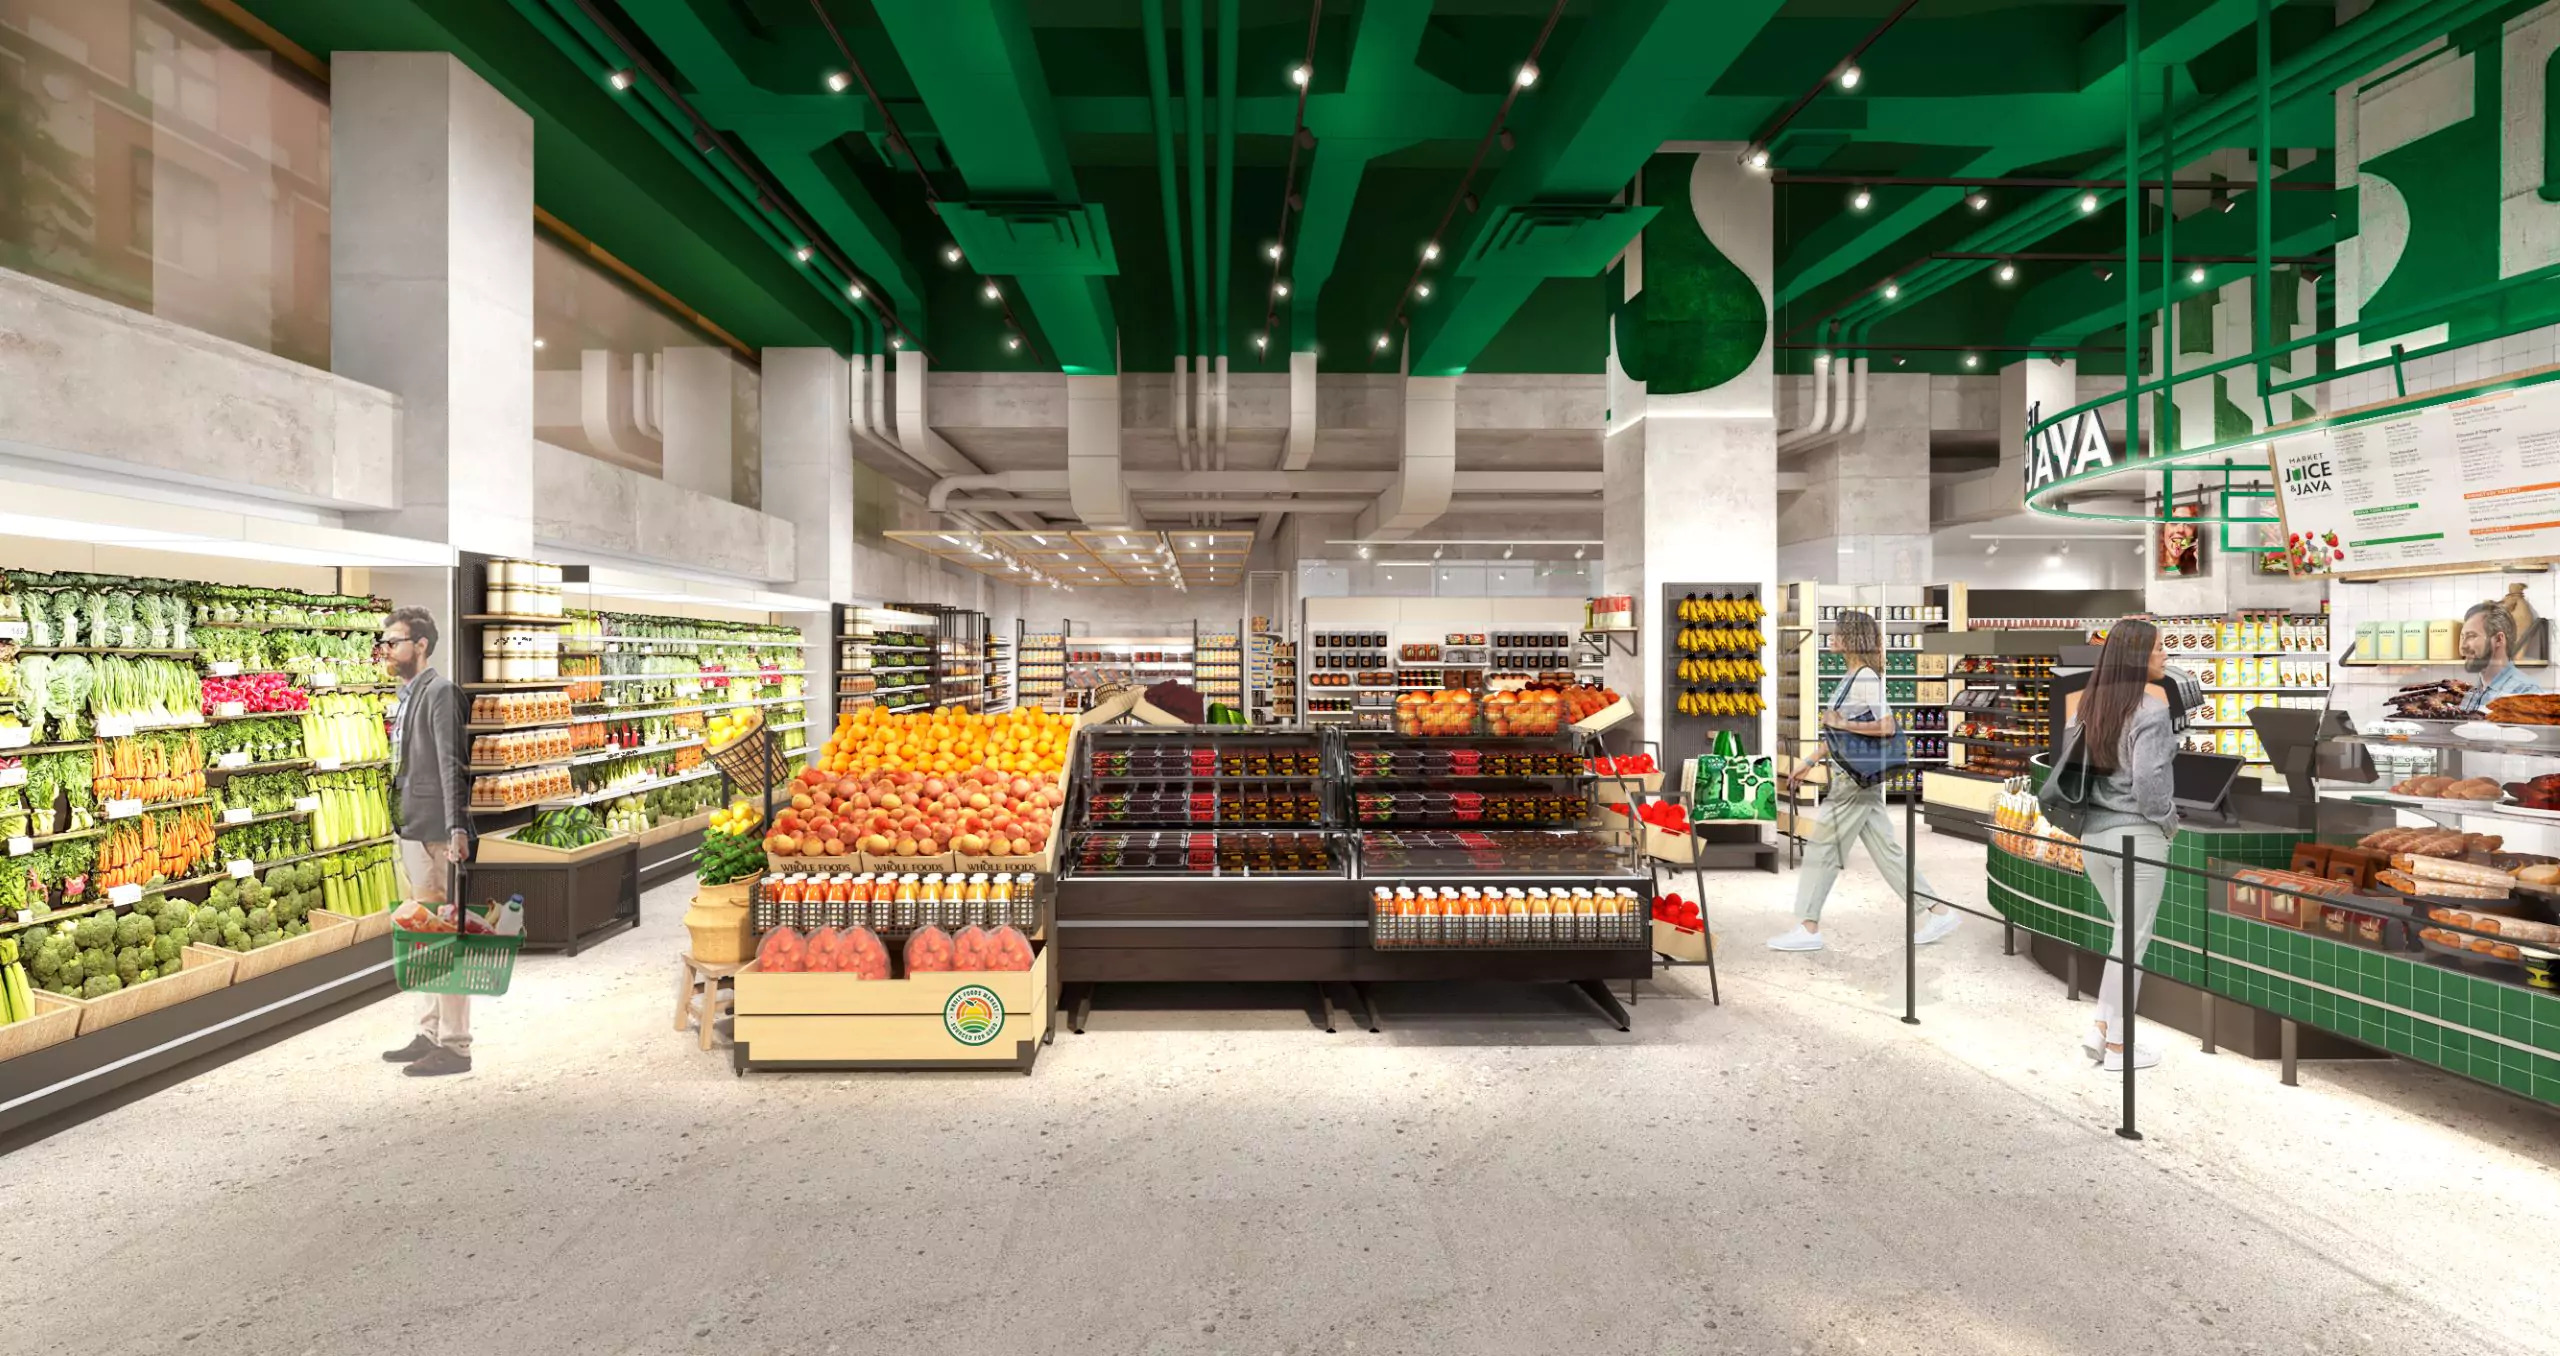 A rendering of the smaller Whole Foods Daily Shop.